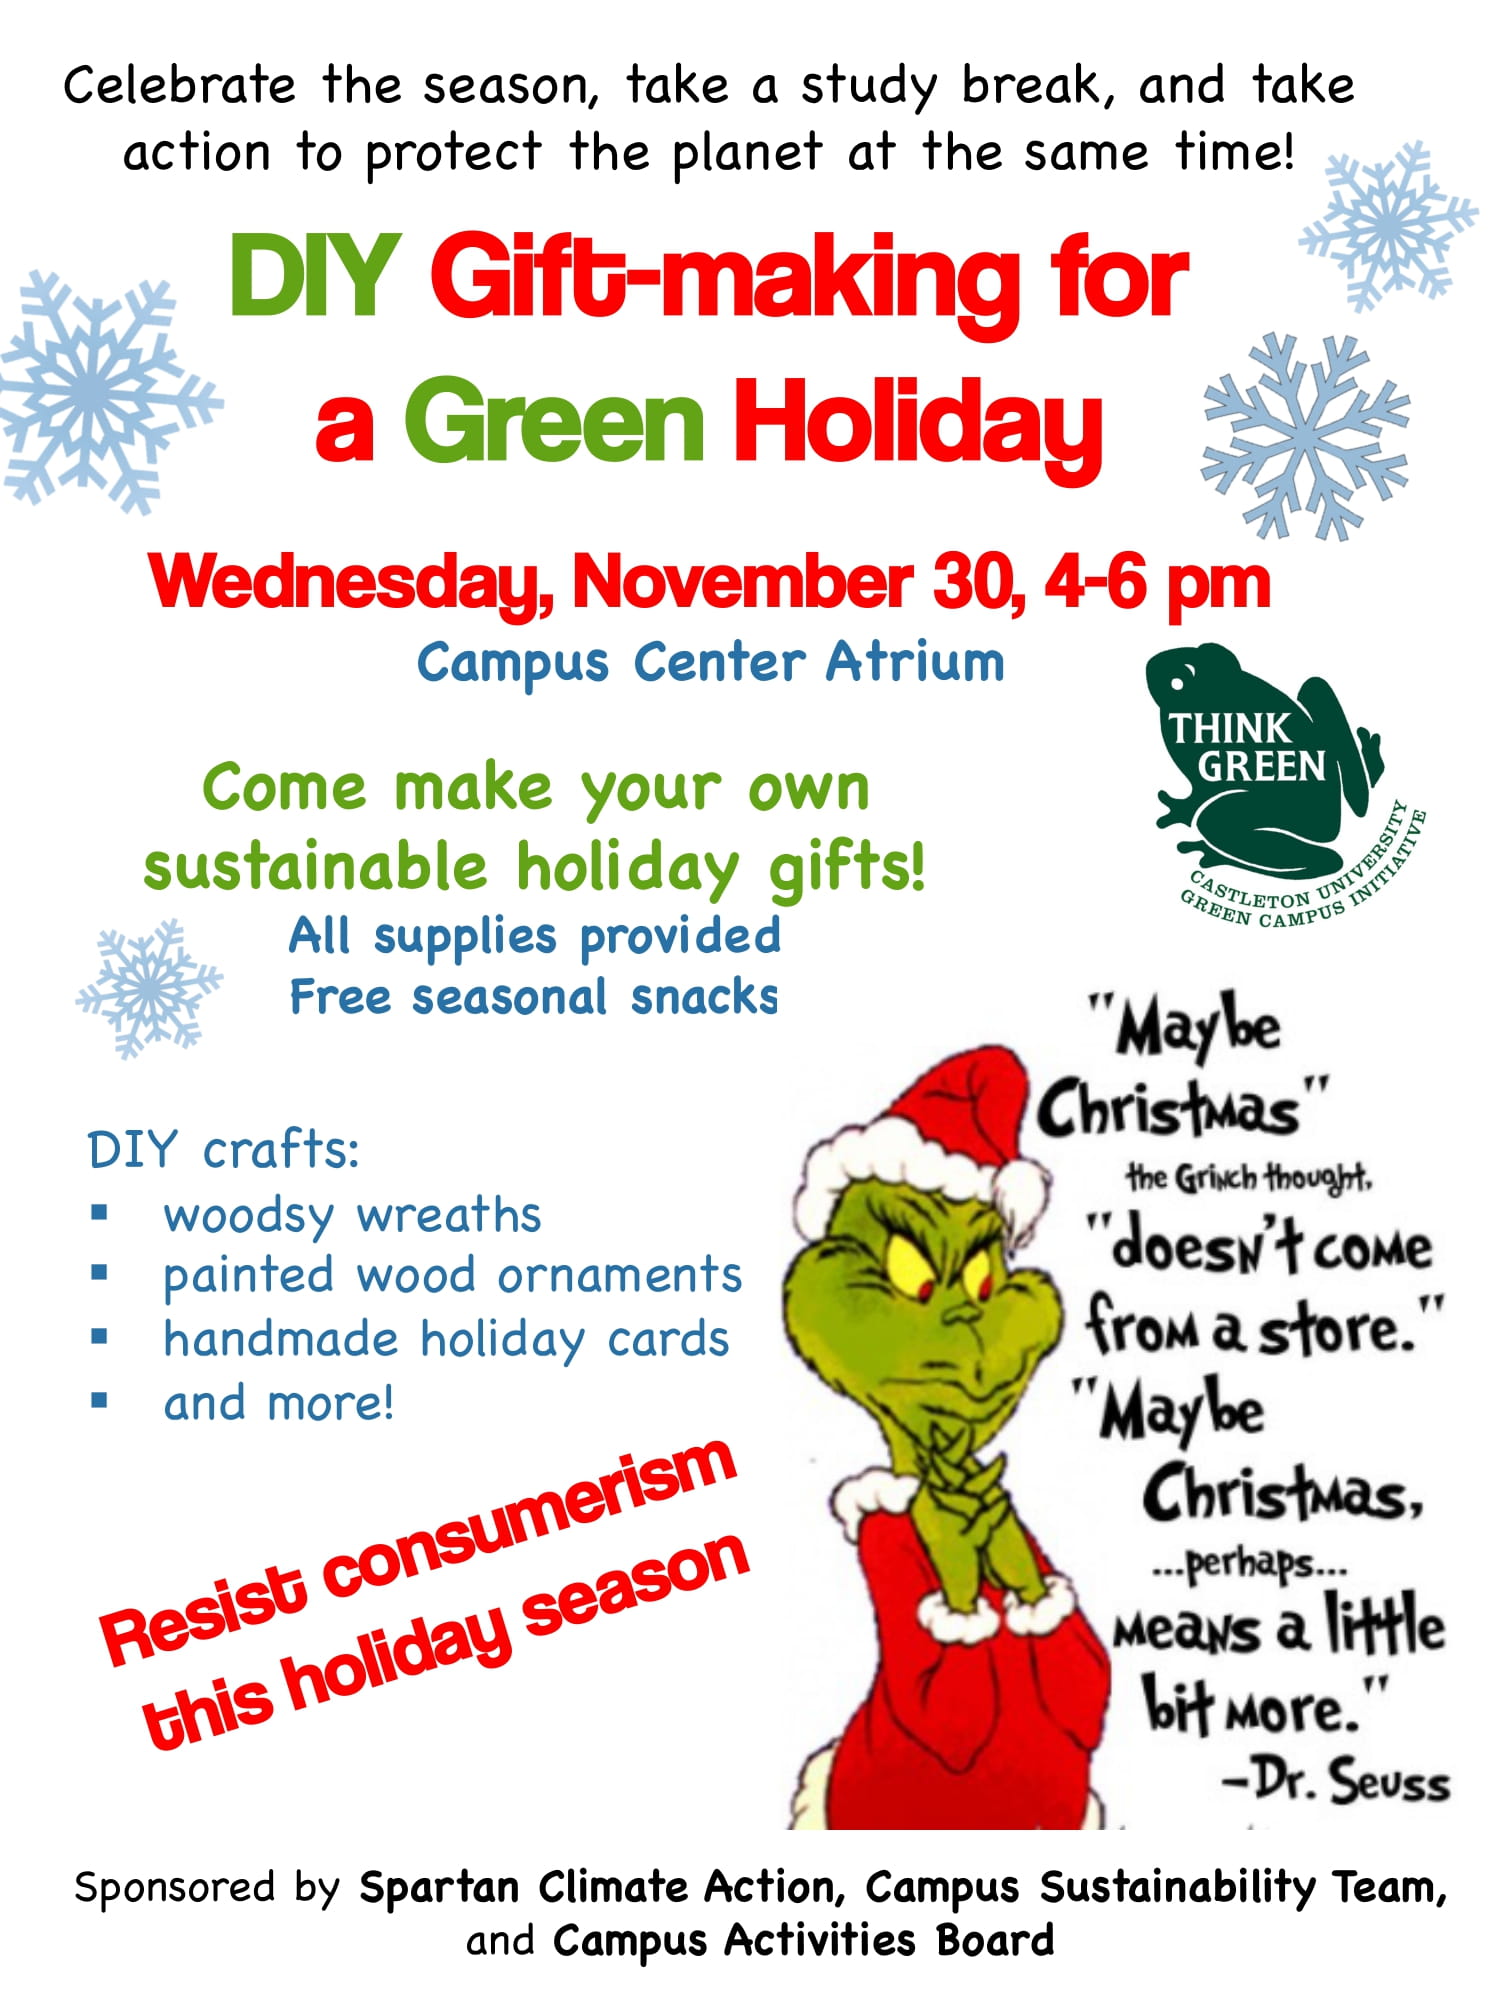 DIY Gift-Making for a Green Holiday! | Wednesday, November 30th | 4-6pm | Campus Center Atrium